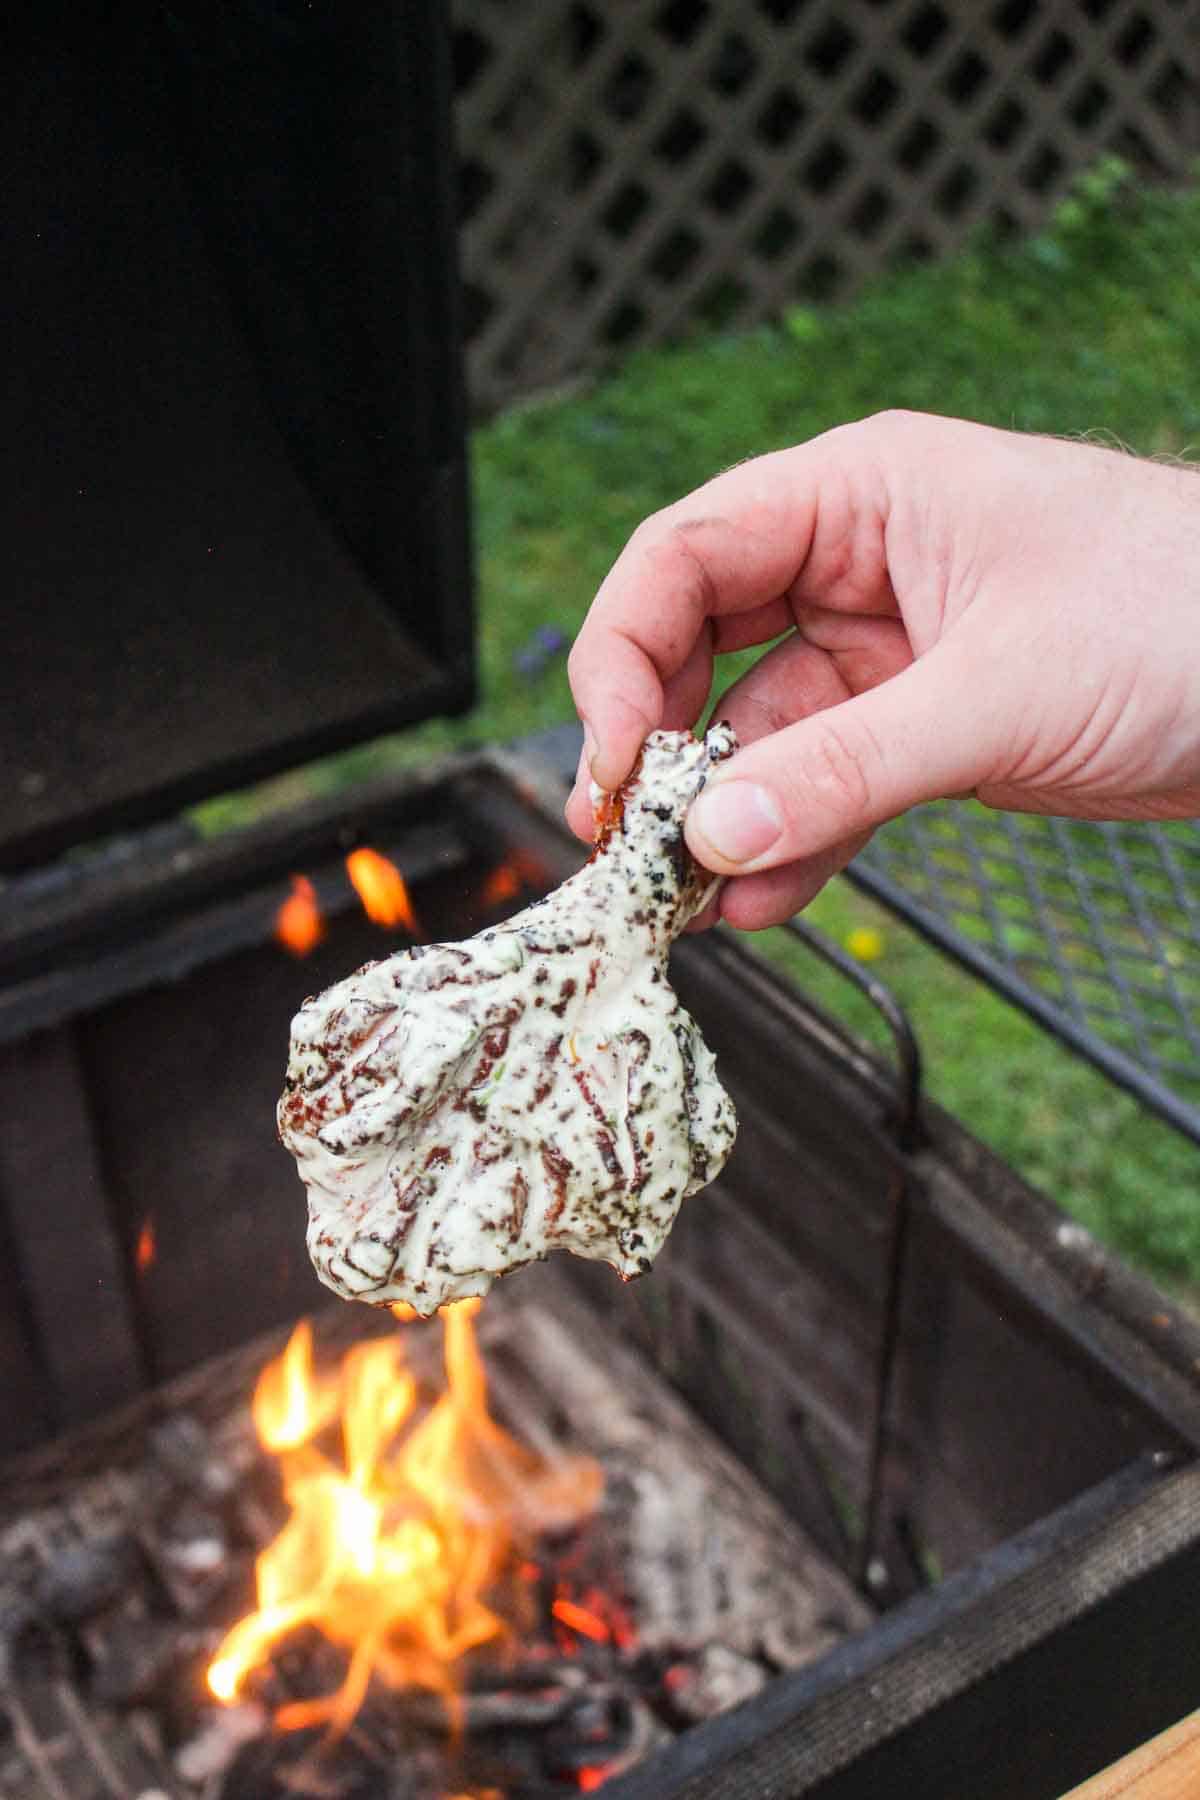 One of the dipped wings being held next to the fire.